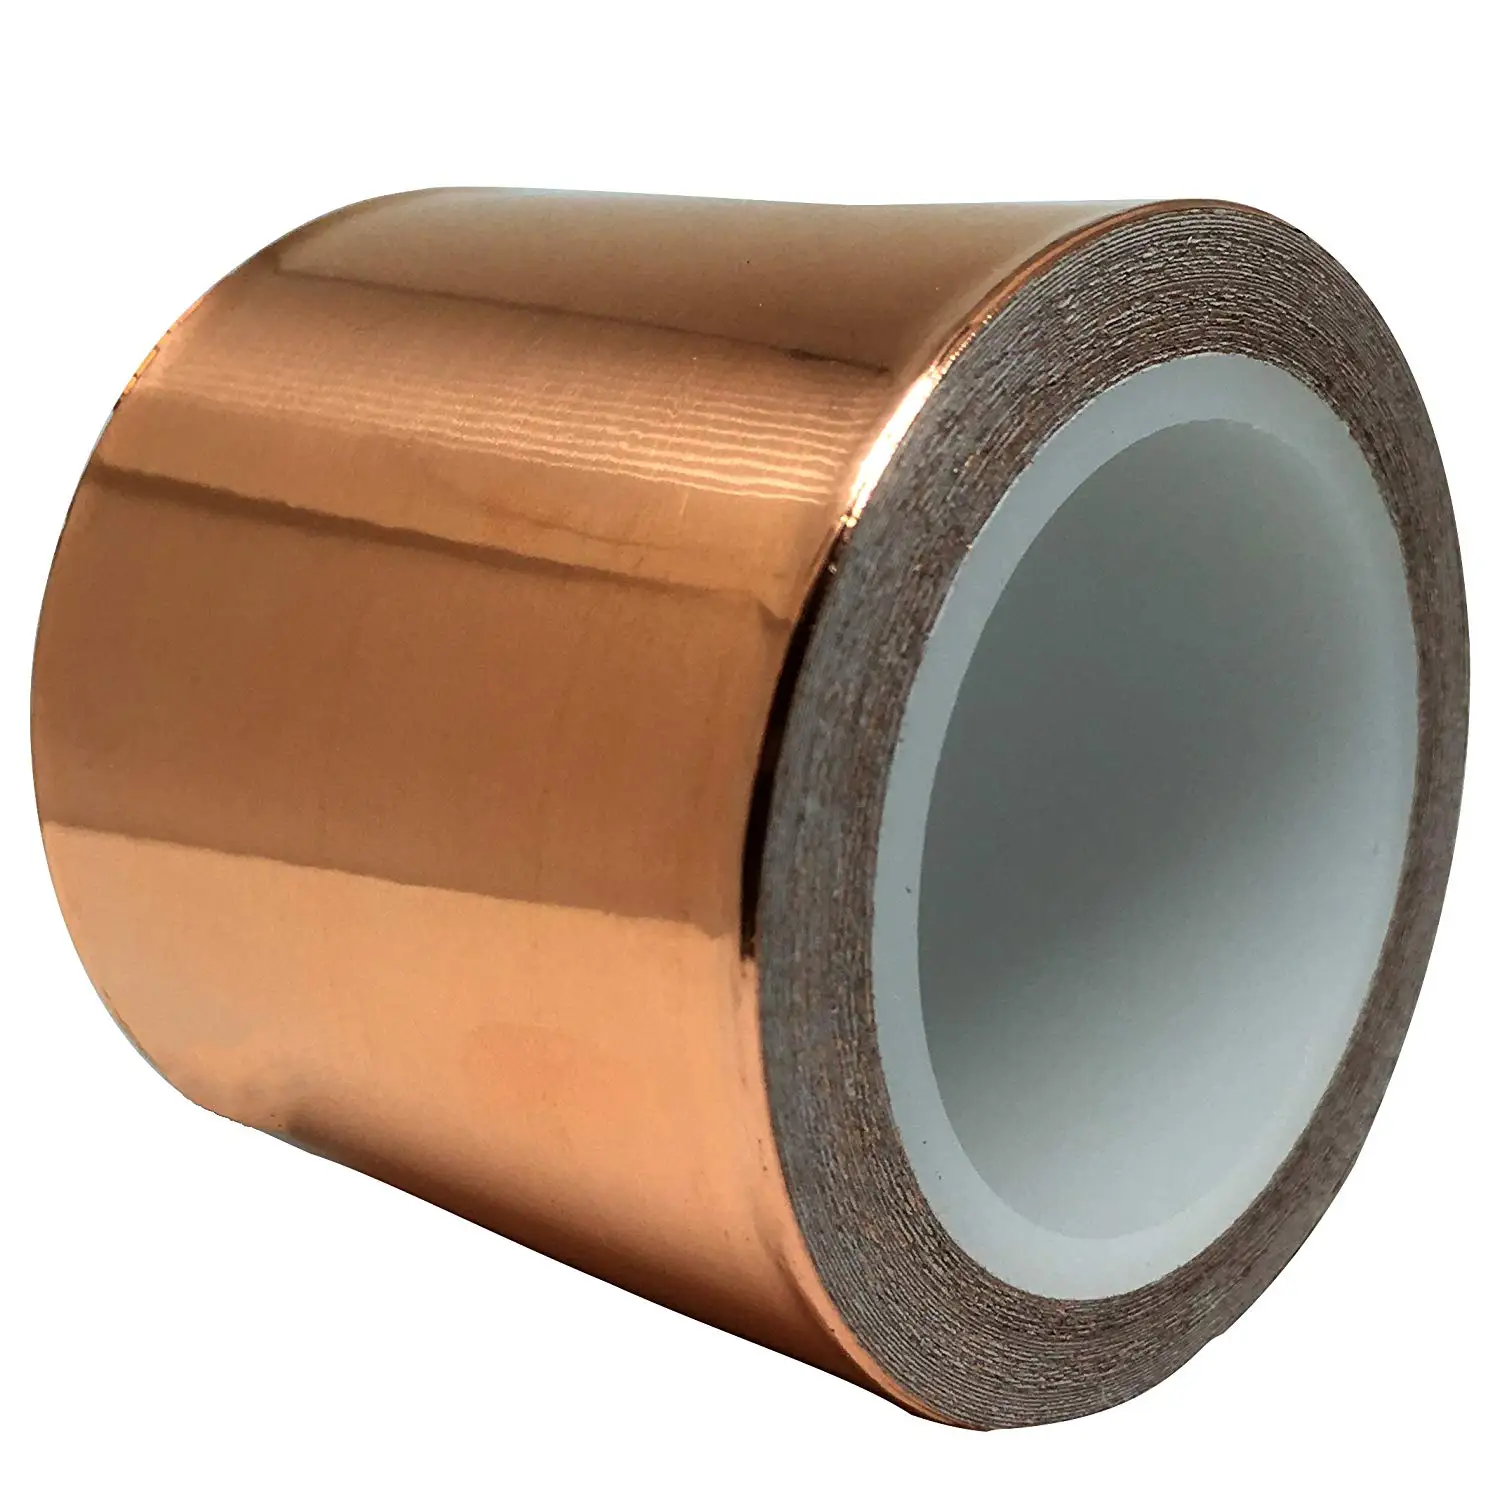 Enamelled copper foil strip / tape with 0.1mm thickness for lithium battery